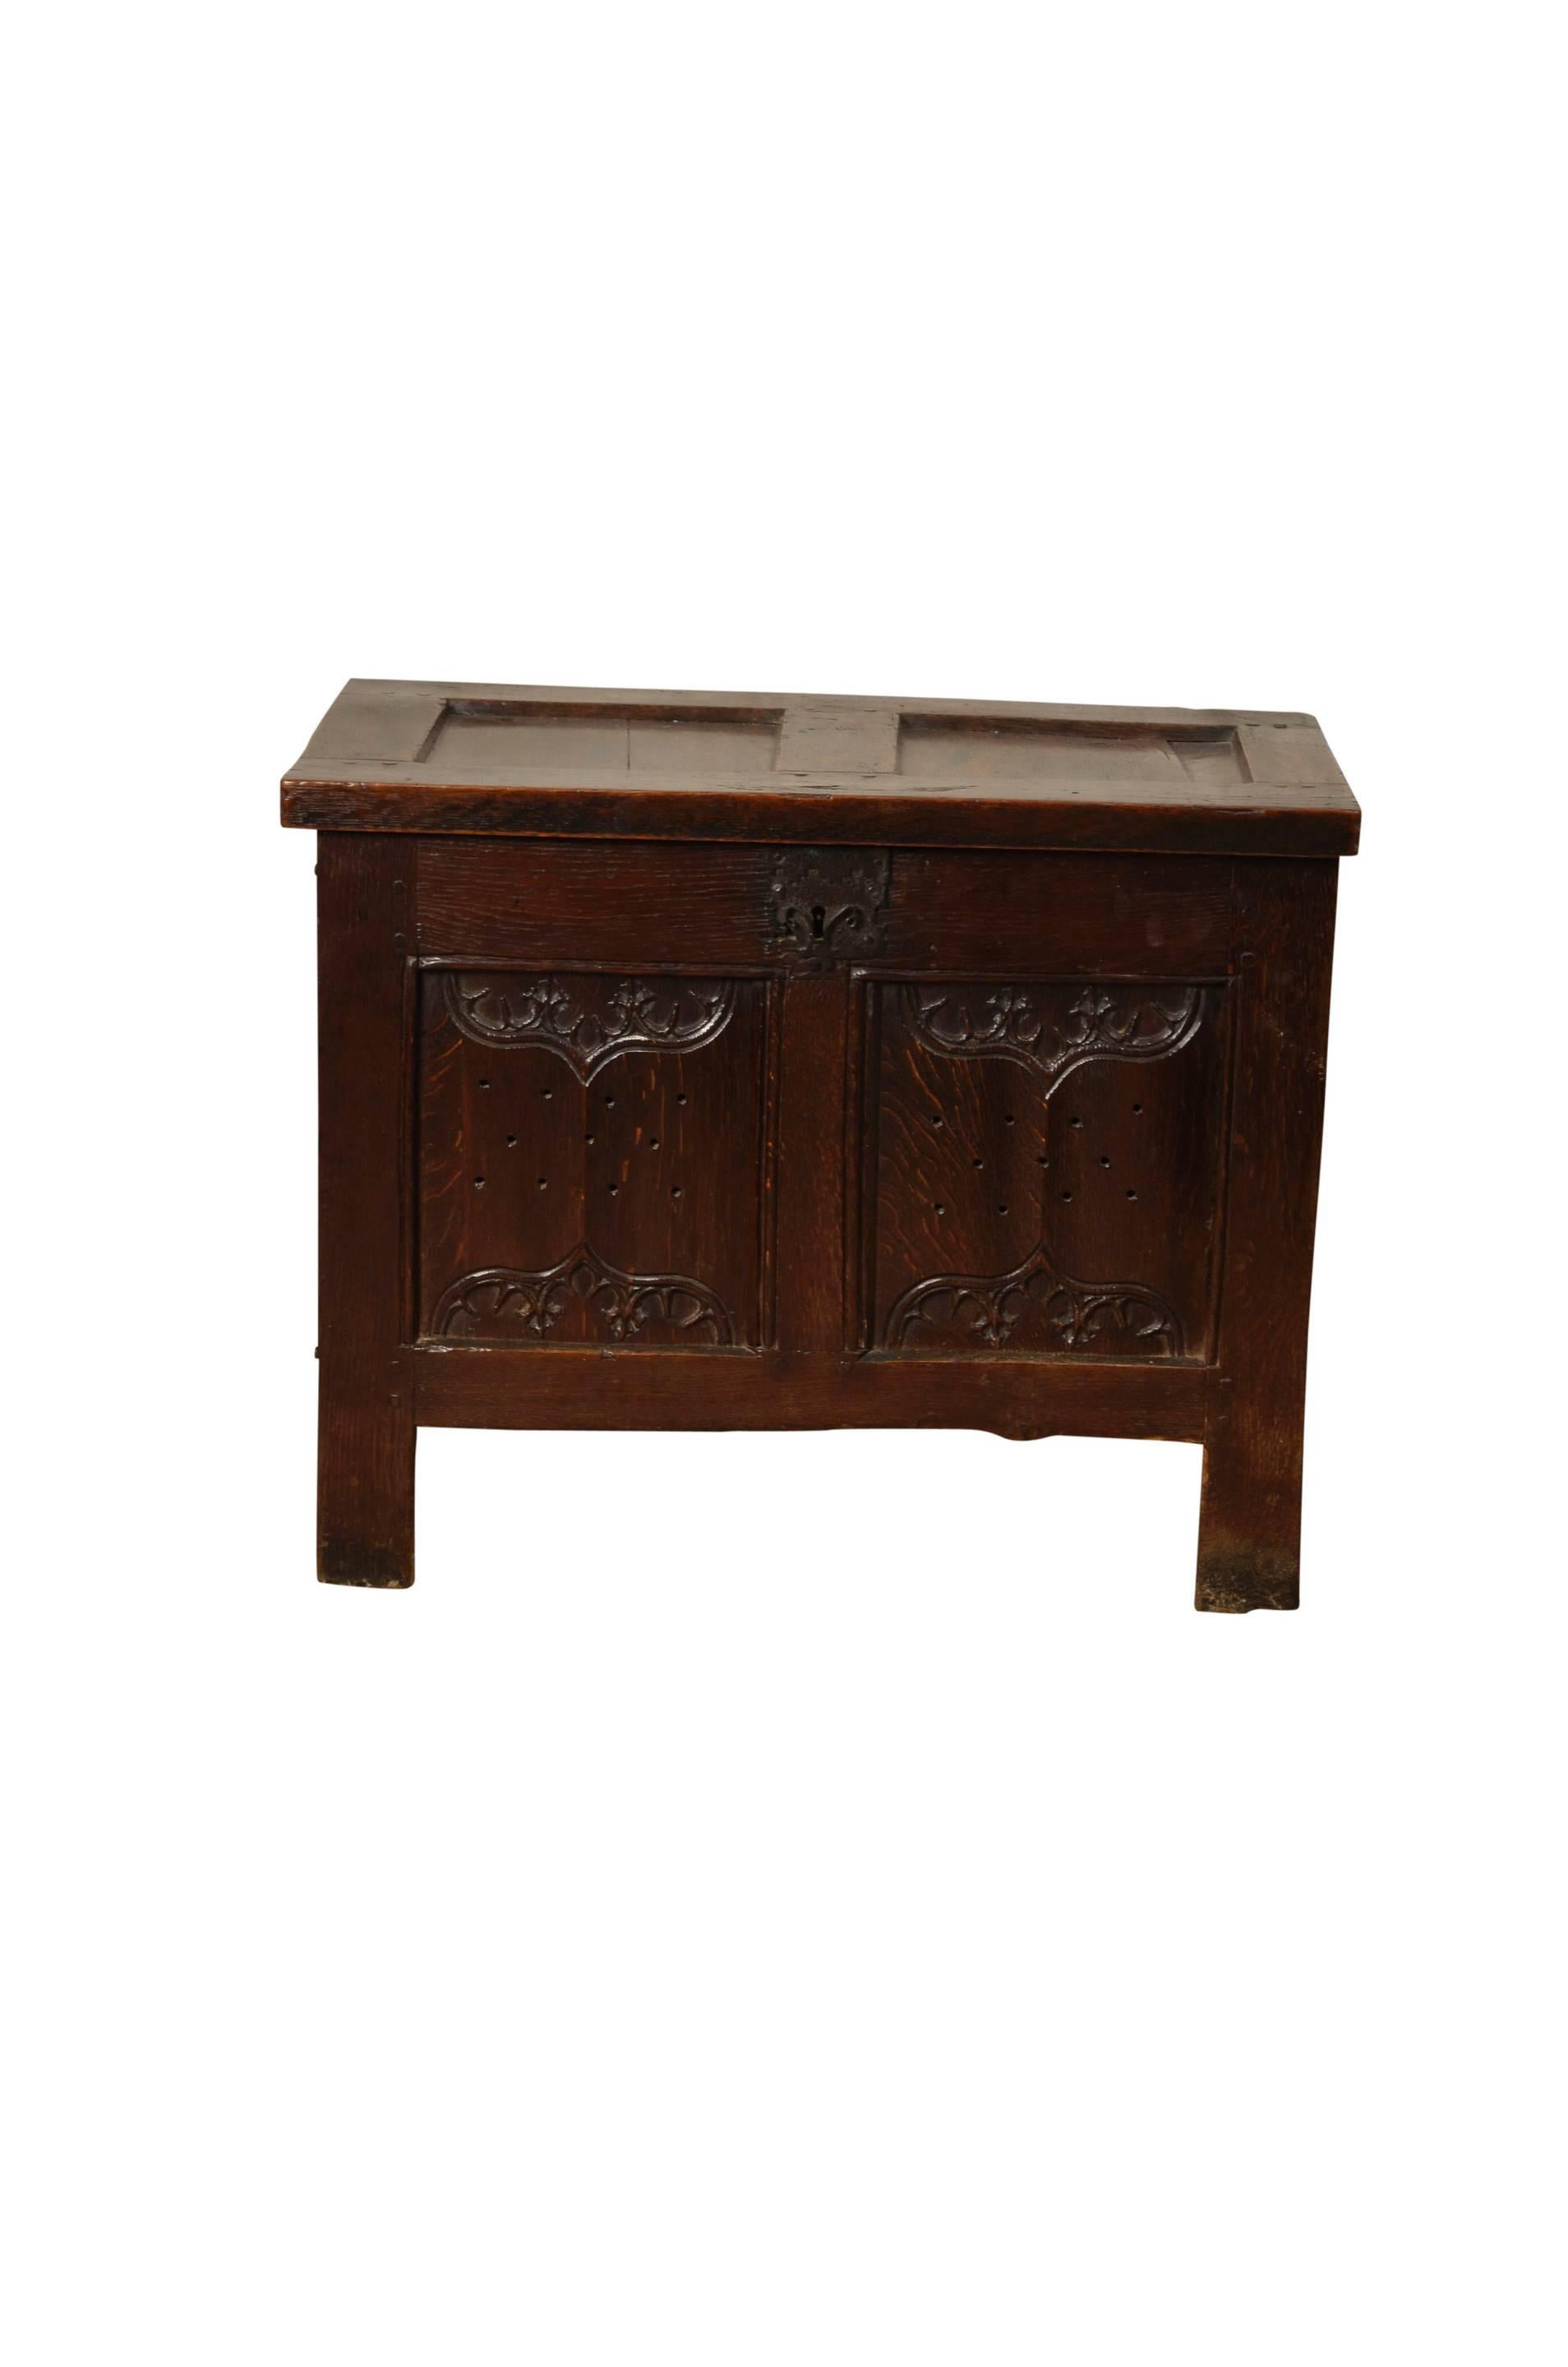 Oak small coffer, the two panelled front with enriched parchemin/linenfold carving drilled with holes for the storage of food, the two panelled top opening to reveal a lidded candlebox and a rare rear narrow shelf. Raised on stile supports.